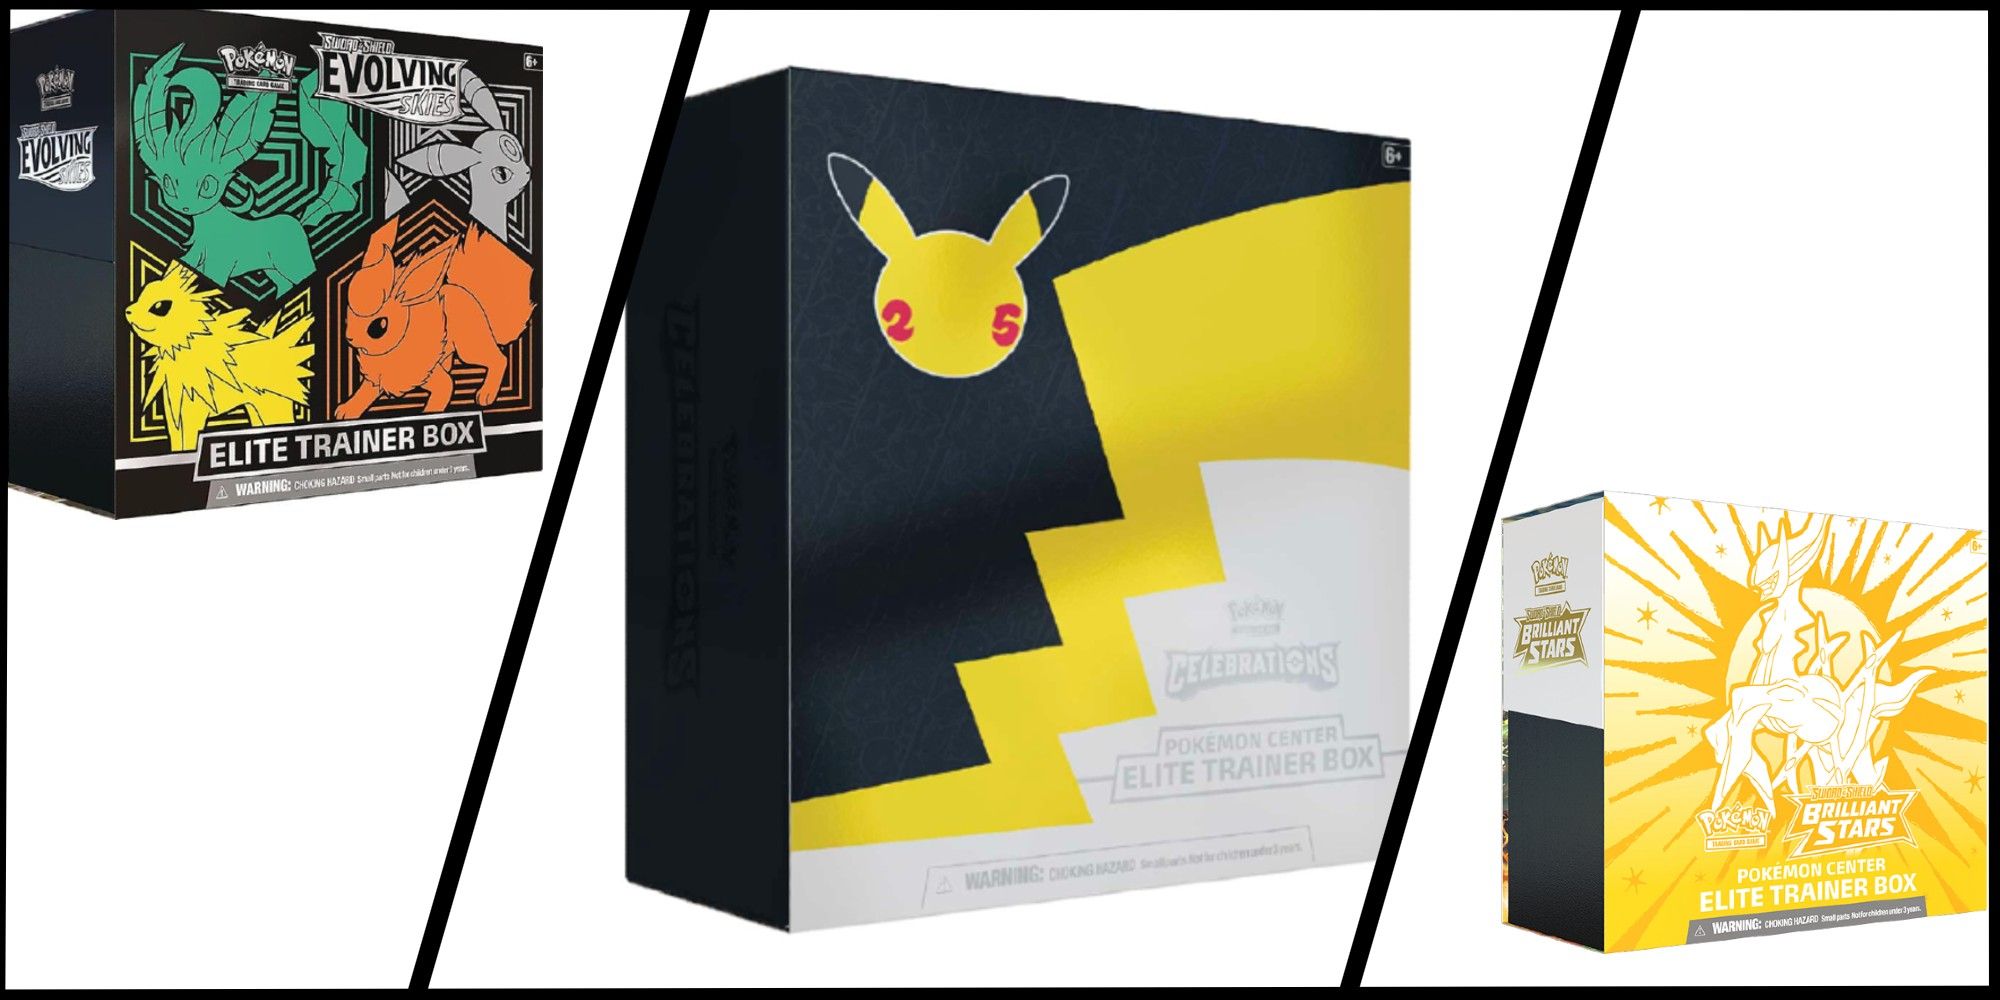 Best Elite Trainer Box Designs Feature Image: Evolving Skies on the left, 25th anniversary celebration in the middle, Brilliant Stars on the right